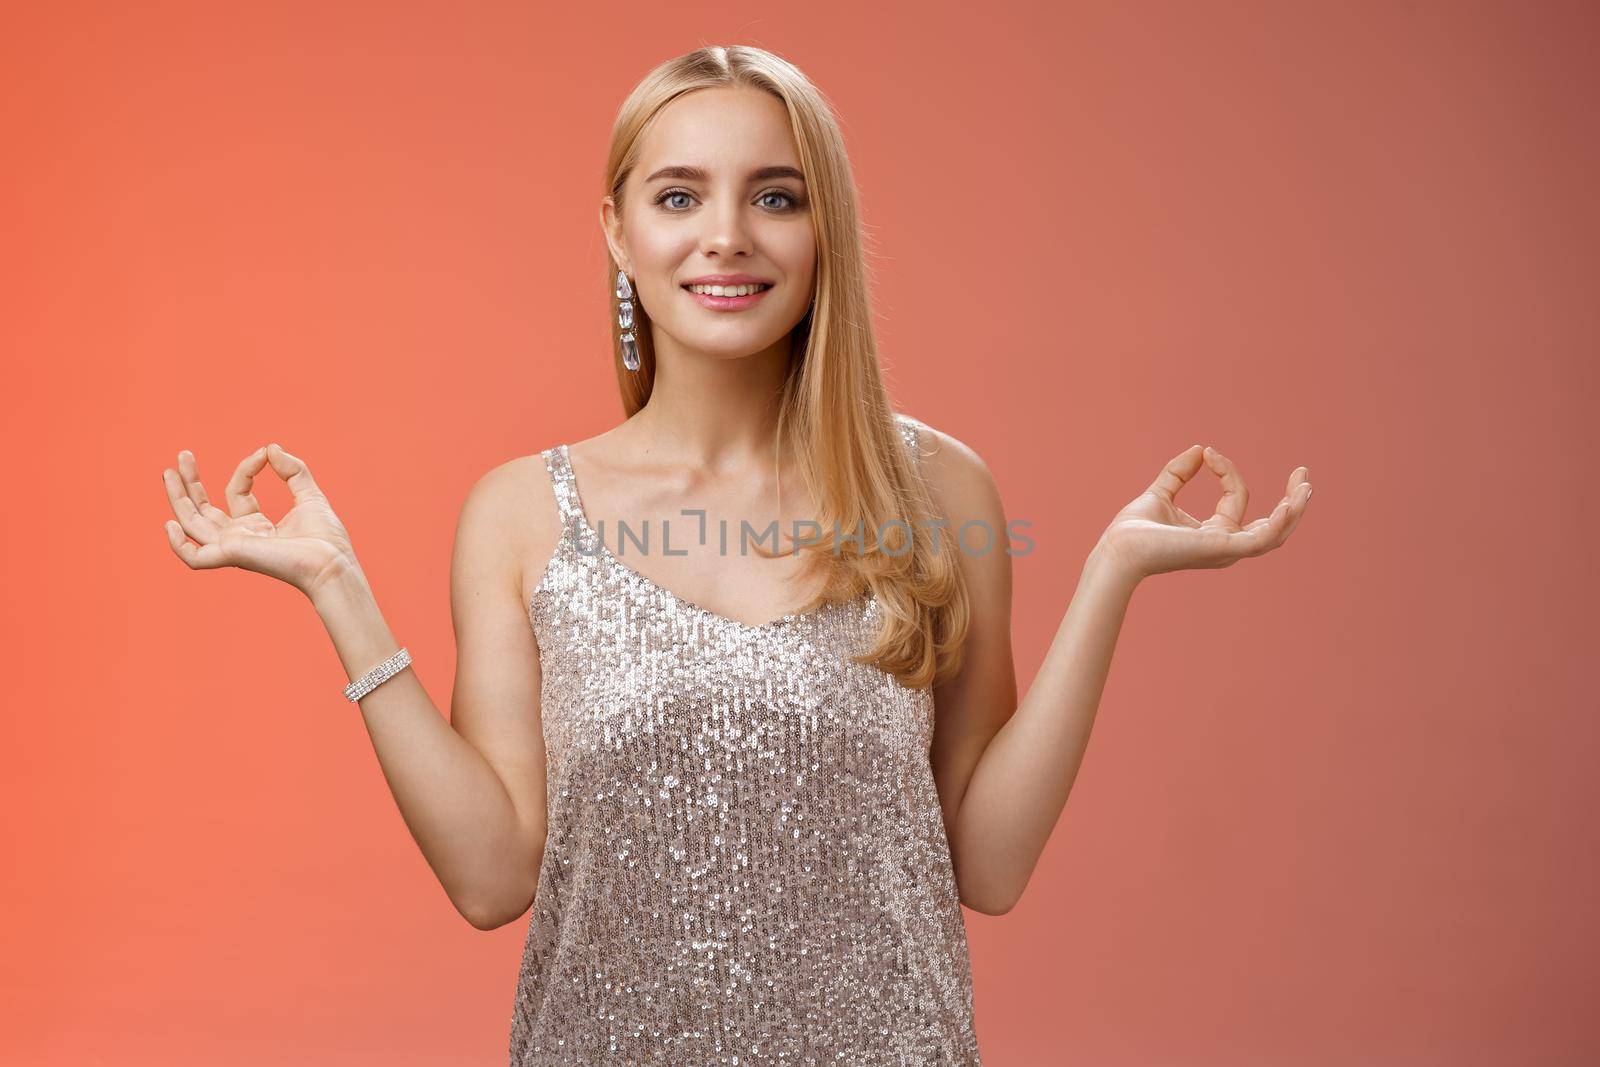 Lifestyle. Calm relieved happy fabulous young blond woman in silver stylish luxury dress standing relaxed red background zen lotus pose reach nirvana smiling peaceful carefree meditating breathing practice.